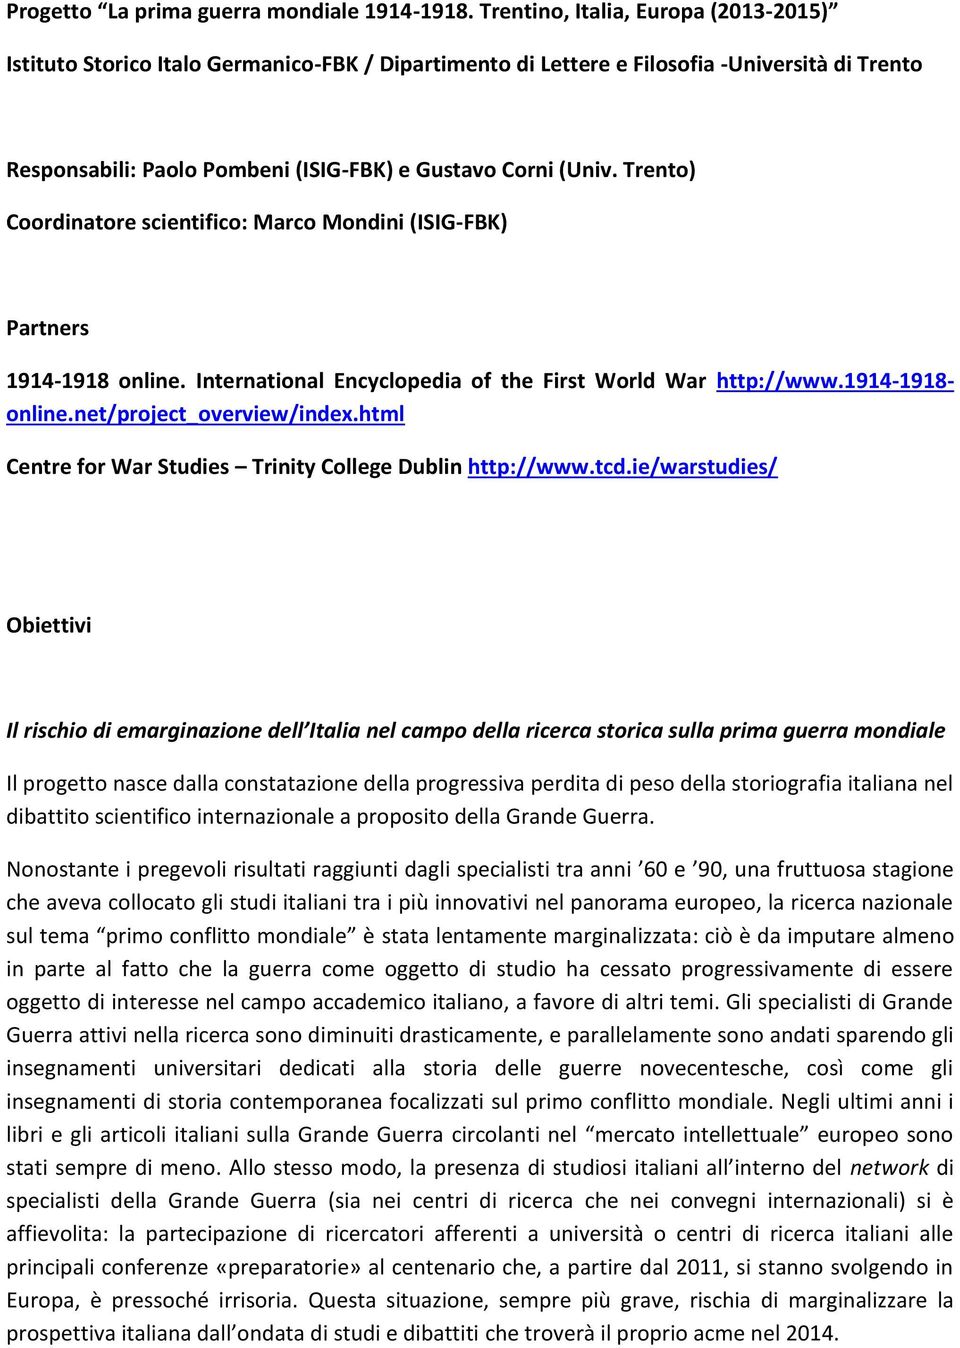 Trento) Coordinatore scientifico: Marco Mondini (ISIG-FBK) Partners 1914-1918 online. International Encyclopedia of the First World War http://www.1914-1918- online.net/project_overview/index.